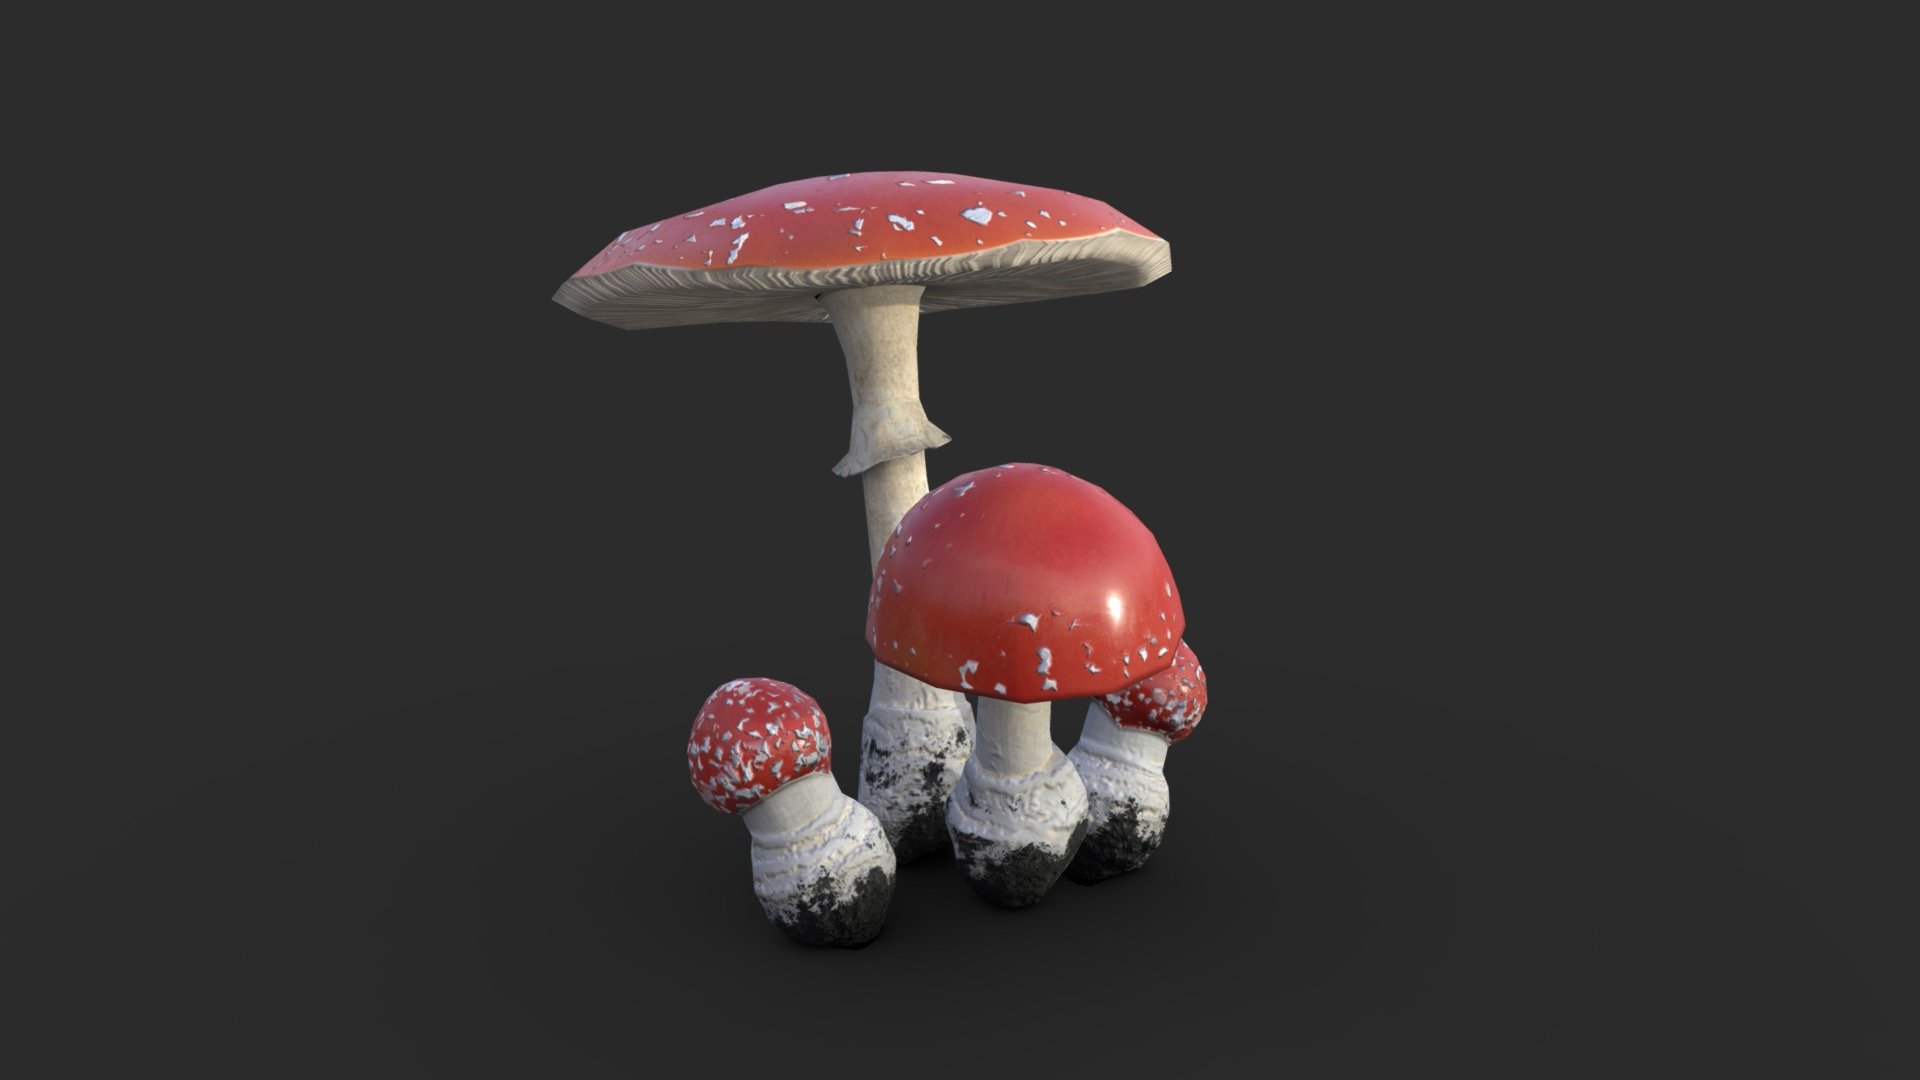 This Amanita Muscaria set includes 3 individuals &amp; 4 prefabs of the mushrooms. The set also includes 3 LODs for each object. 

The asset is available in realistic style and can be used in any game (post-apo, first person shooter, GTA like, construction… ). All objects share a unique material for the best optimization for games.

Those AAA game assets of fly agaric toxic mushroom will embellish you scene and add more details which can help the gameplay and the game-design or level-design. 

Low-poly model &amp; Blender native 3.1

SPECIFICATIONS




Objects : 7

Polygons : 928

Render engine : Eevee (Cycles ready)

GAME SPECS




LODs : Yes (inside FBX for Unity &amp; Unreal)

Numbers of LODs : 3

EXPORTED FORMATS




FBX

Collada

OBJ

TEXTURES




Materials in scene : 1

Textures sizes : 4K

Textures types : Base Color, Roughness, Normal (DirectX &amp; OpenGL), Heigh, AO &amp; SSS (also Unity &amp; Unreal ARM workflow maps)

Textures format : PNG
 - Fly Amanita - Buy Royalty Free 3D model by KangaroOz 3D (@KangaroOz-3D) 3d model